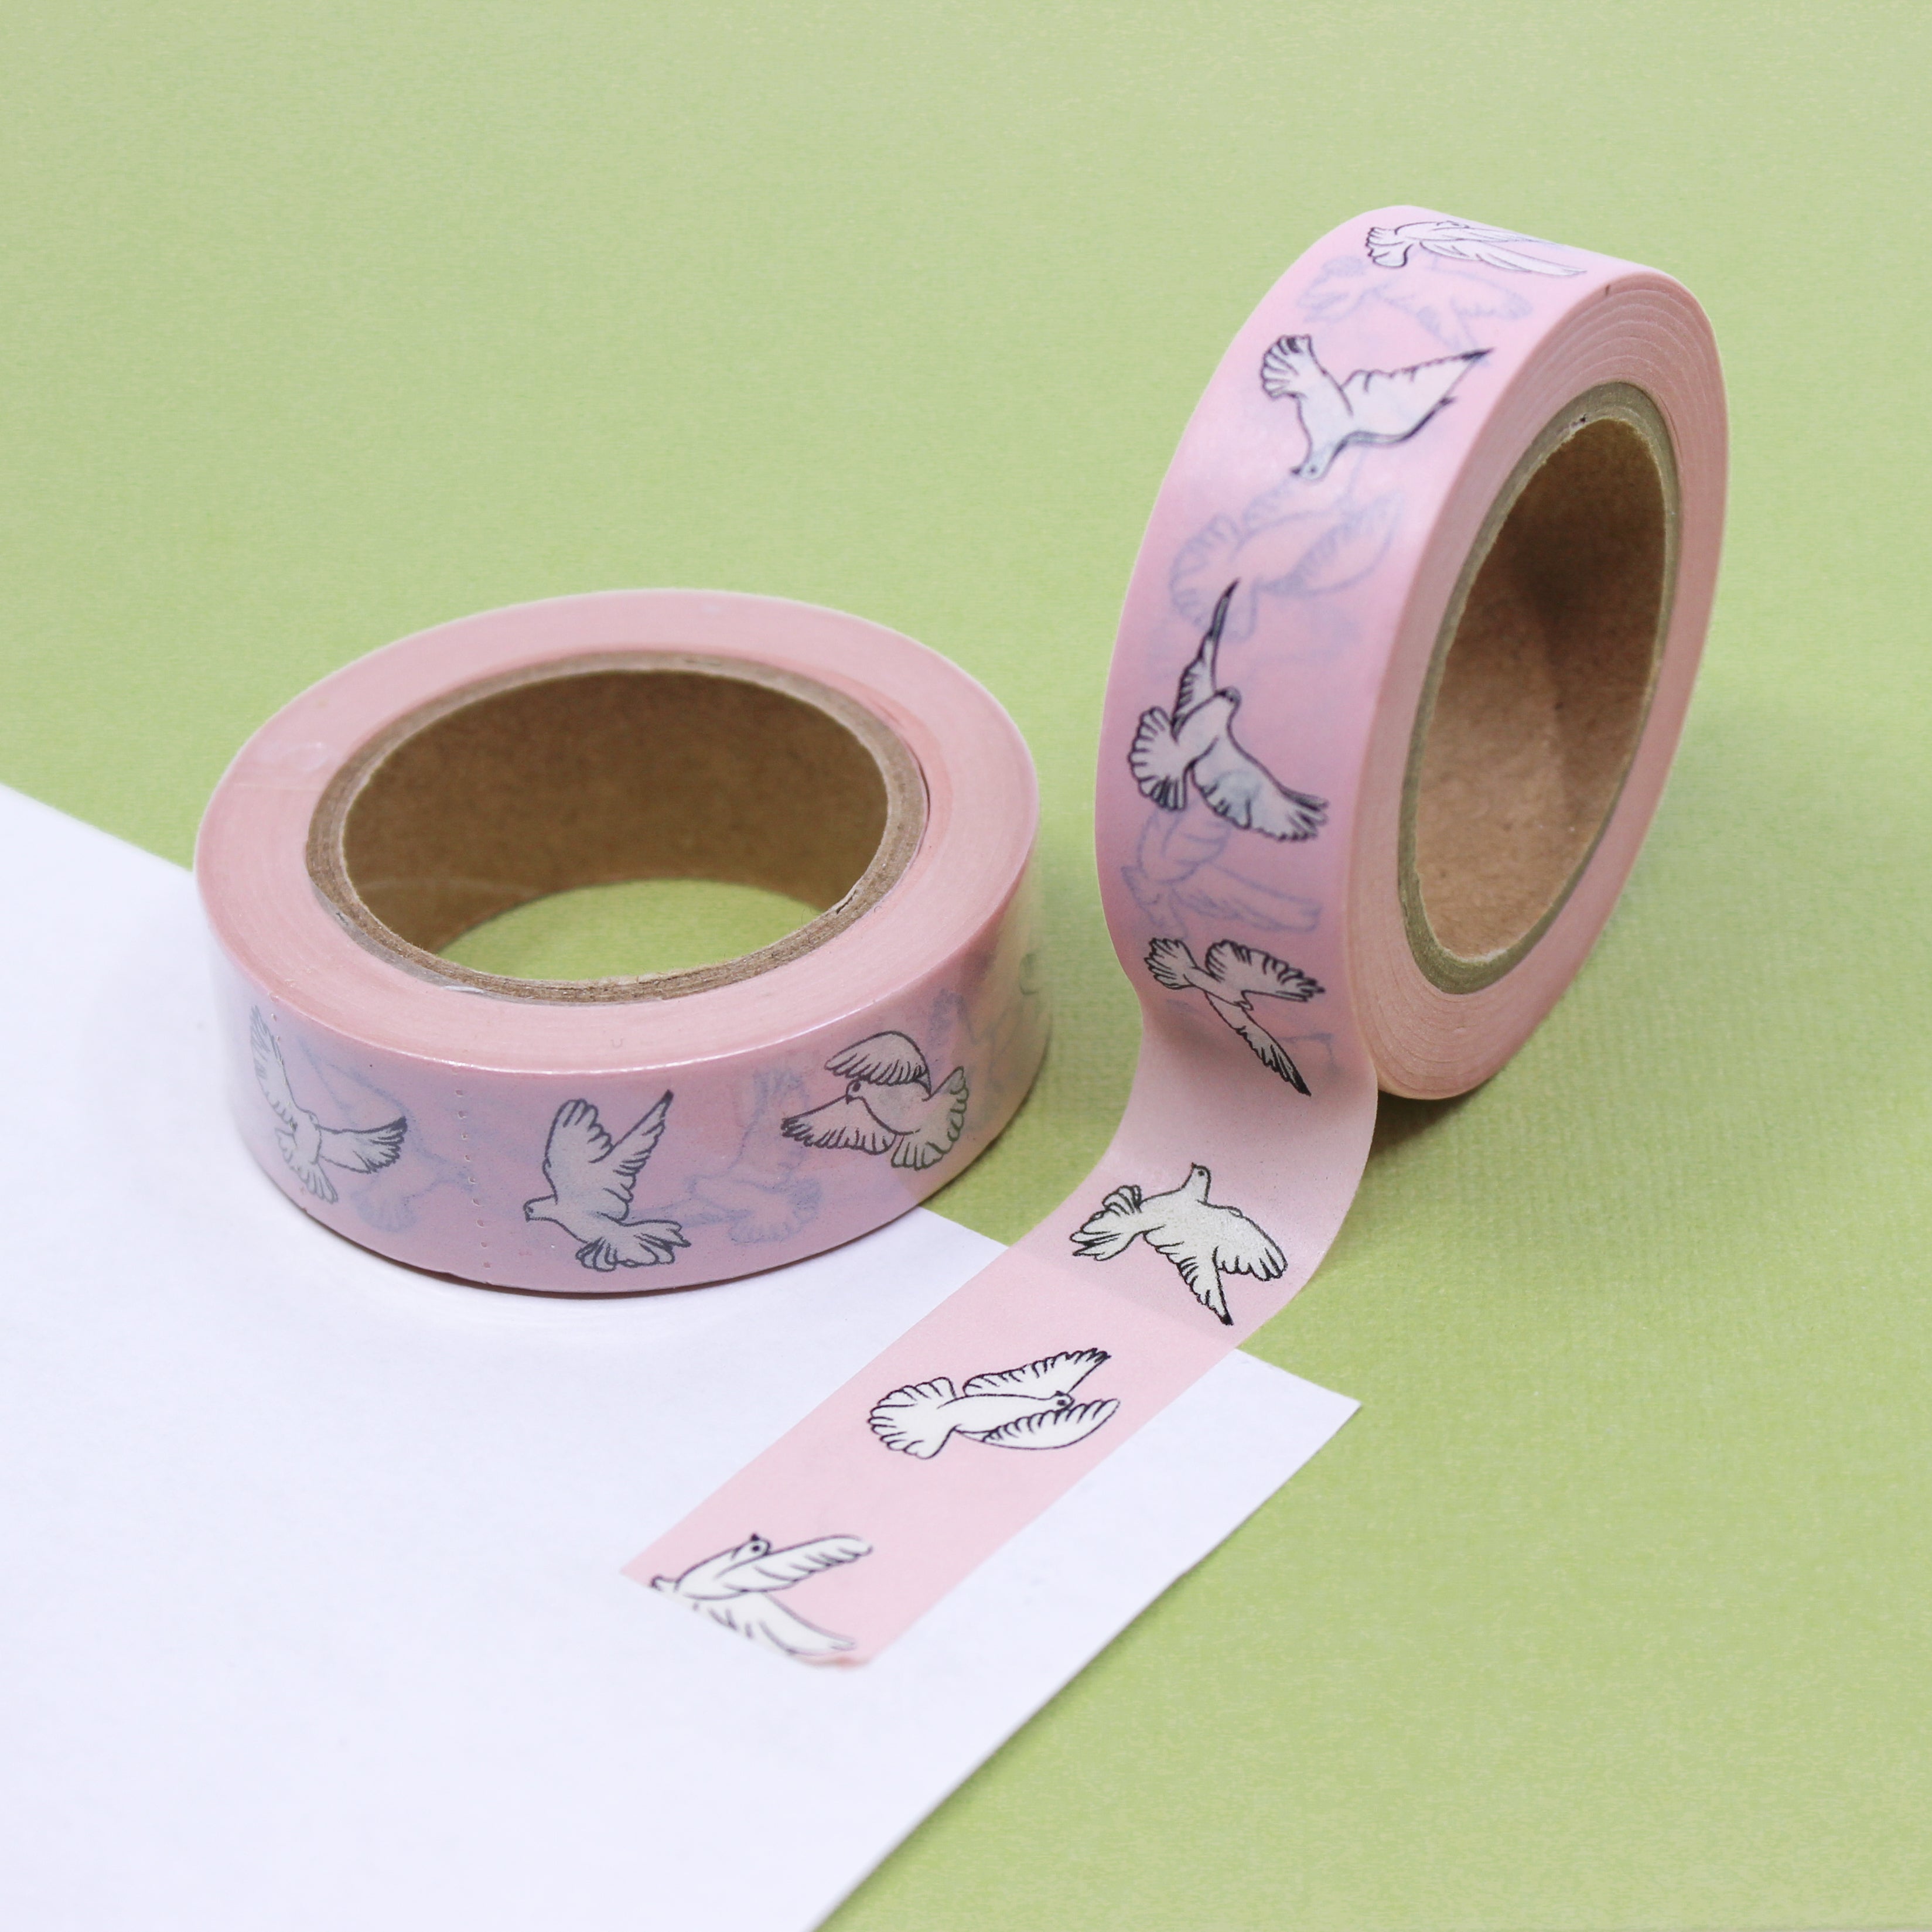 This is a pink flying doves view themed washi tape from BBB Supplies Craft Shop